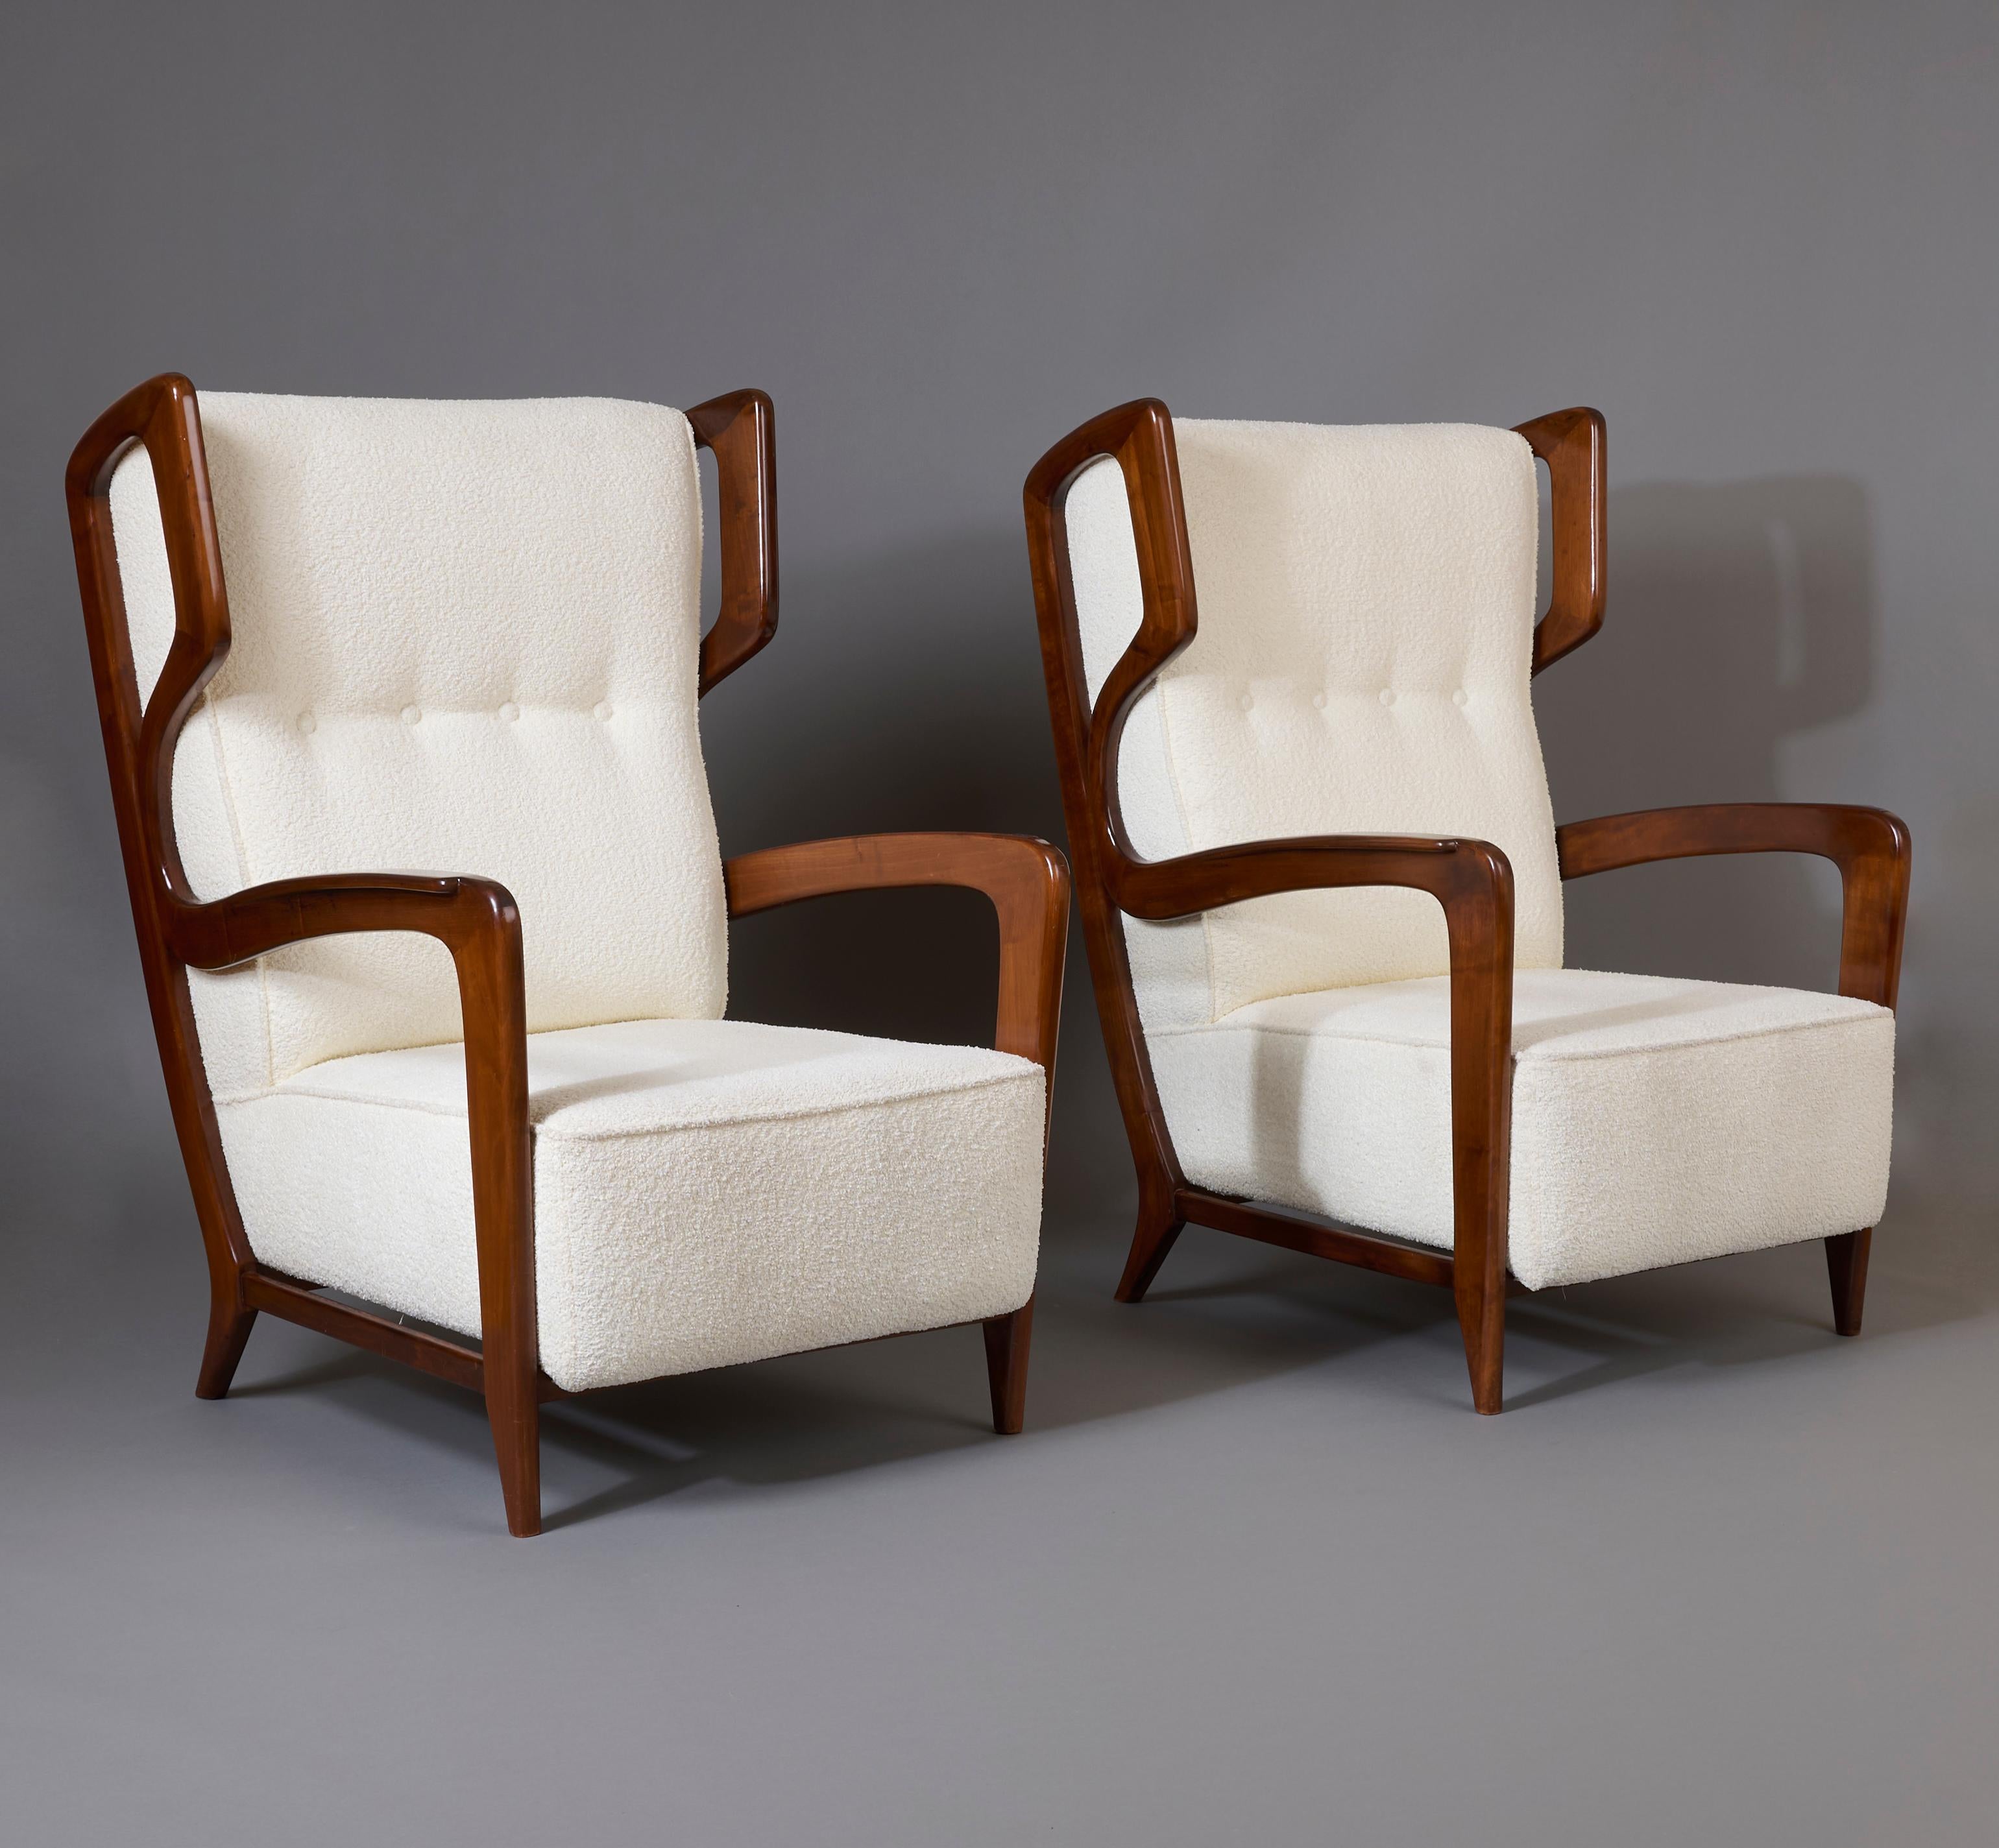 Bouclé Gio Ponti, Exceptional Pair of Rare Wingback Armchairs in Walnut, Italy, 1940s For Sale